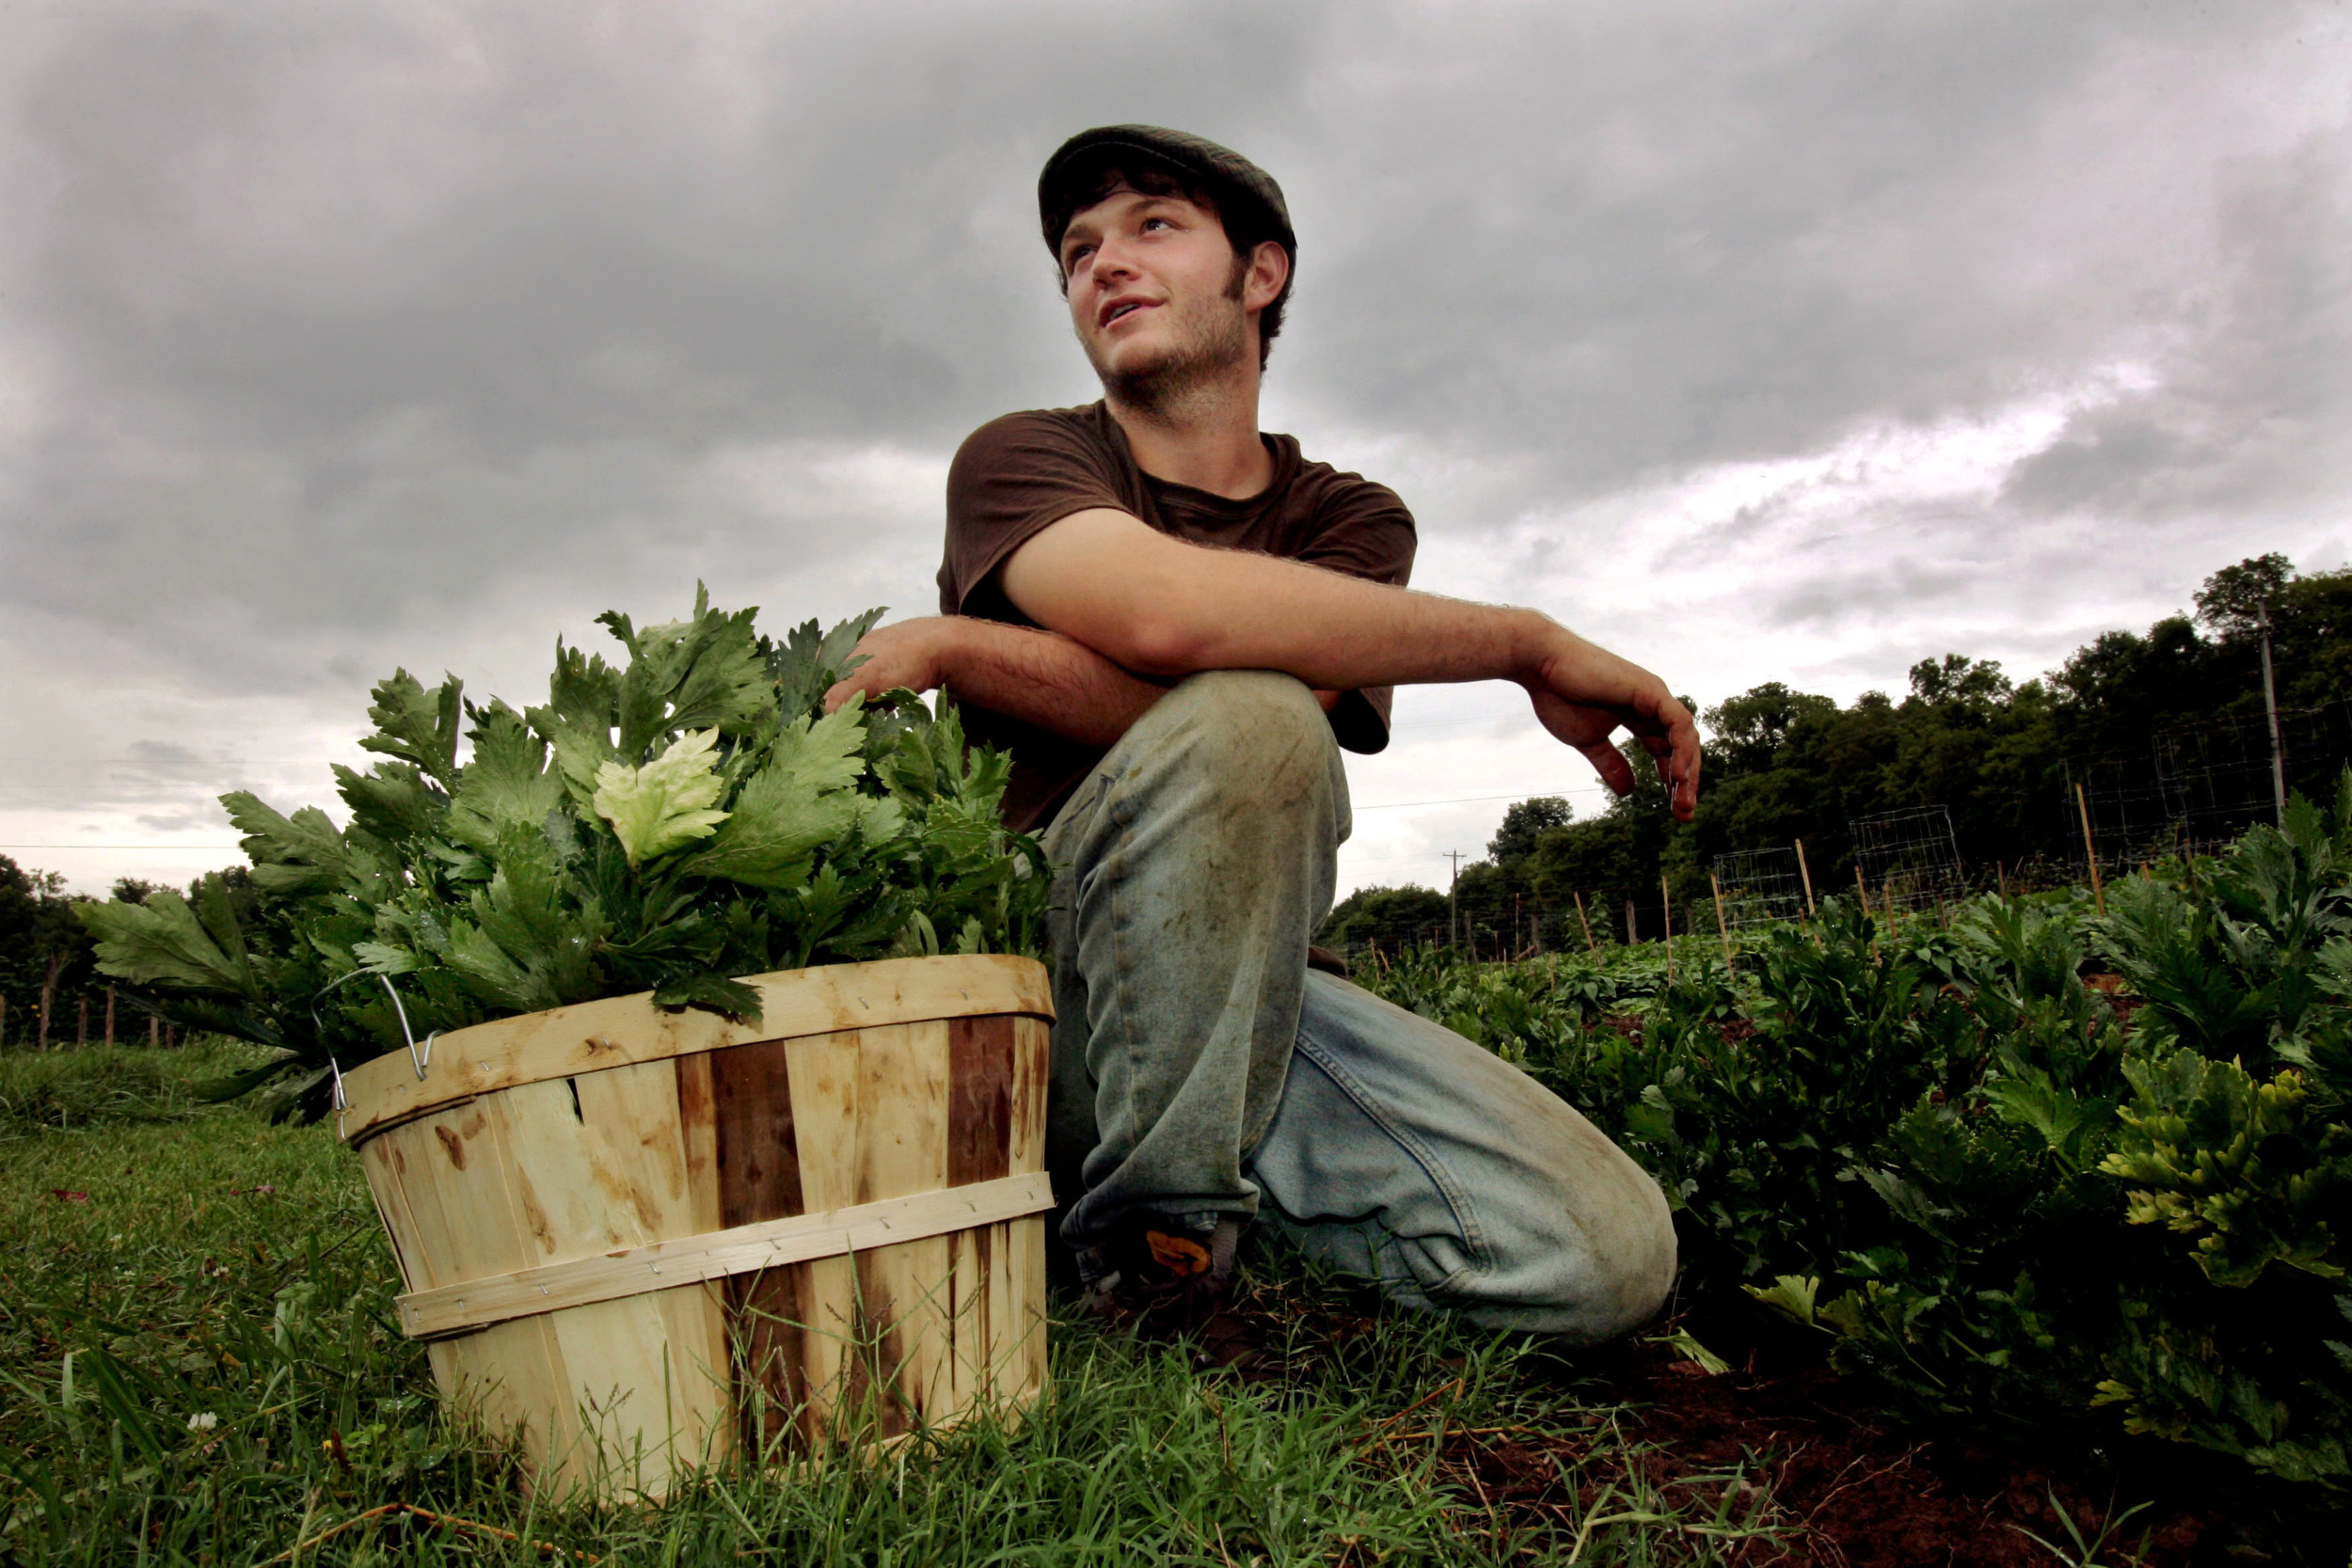  Eric Wooldridge, farm manager at Sulphur Creek Farm, harvests celery outside Nashville, Tenn. The commercial organic farm runs a CSA and sends 50-80% of its harvest to groups like Second Harvest food bank. 